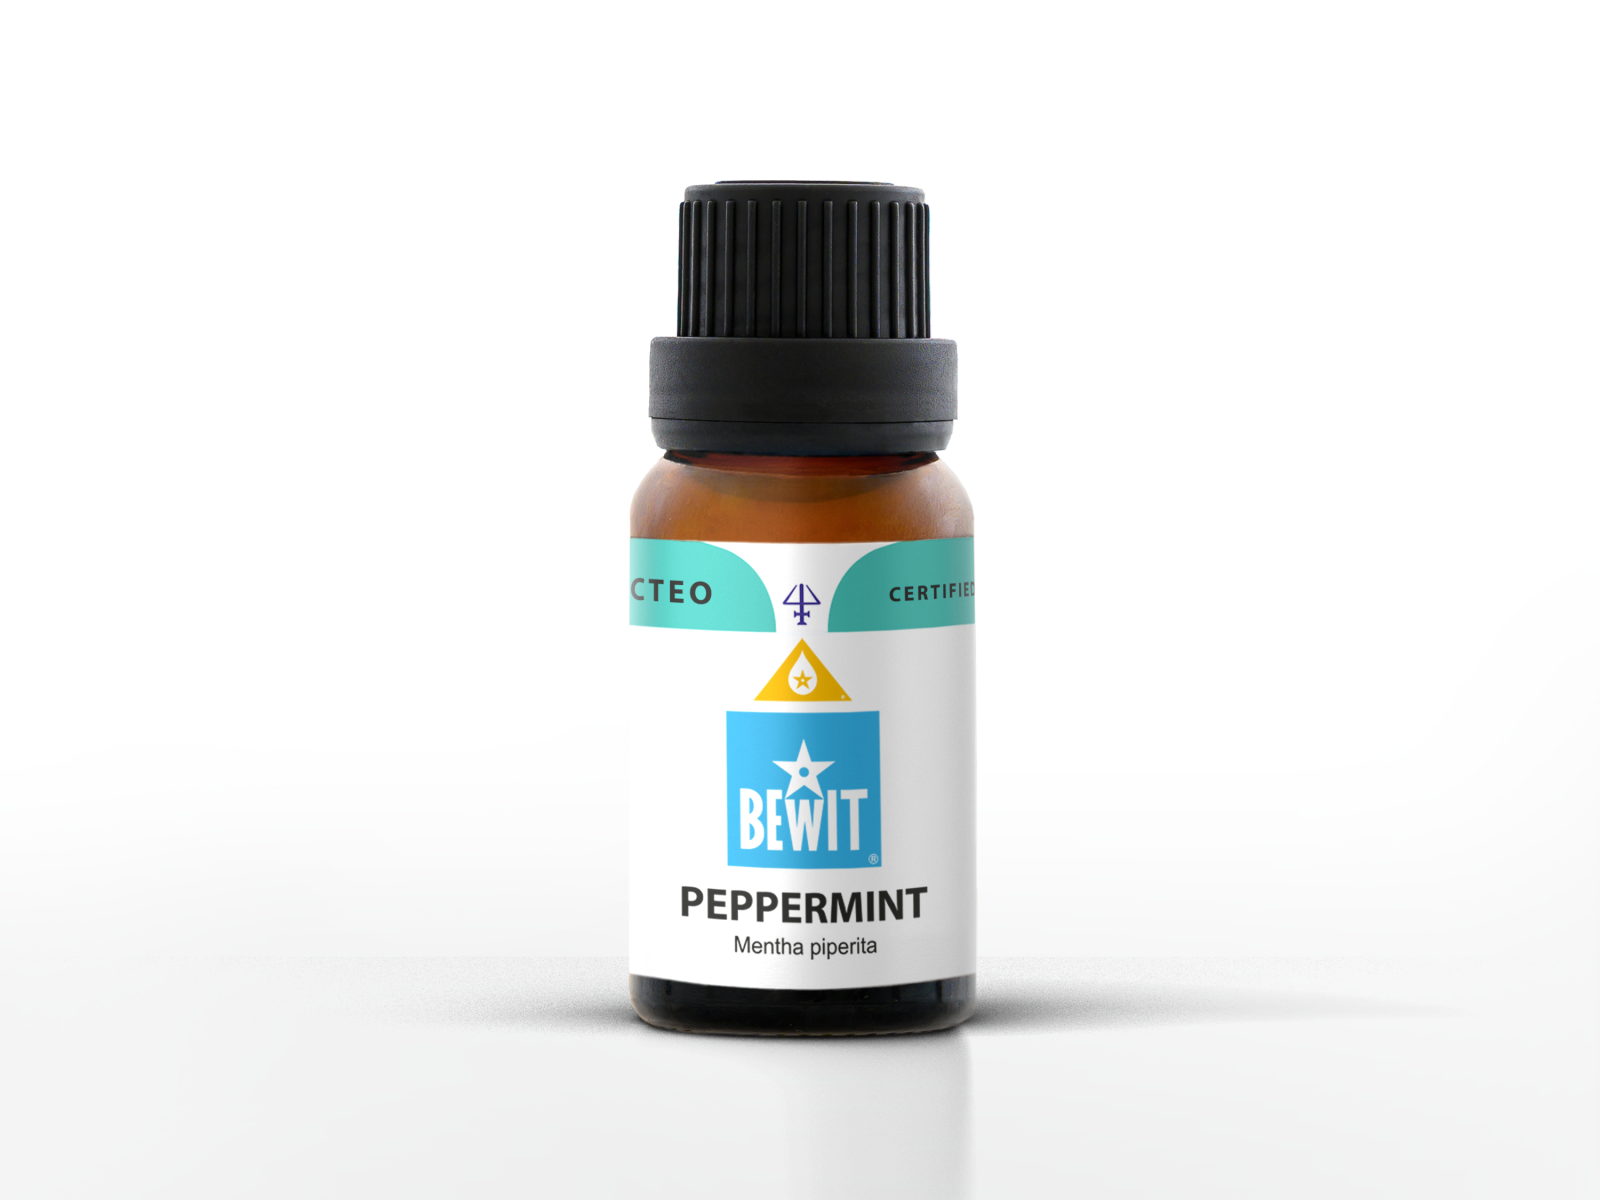 Peppermint - It is a 100% pure essential oil - 2